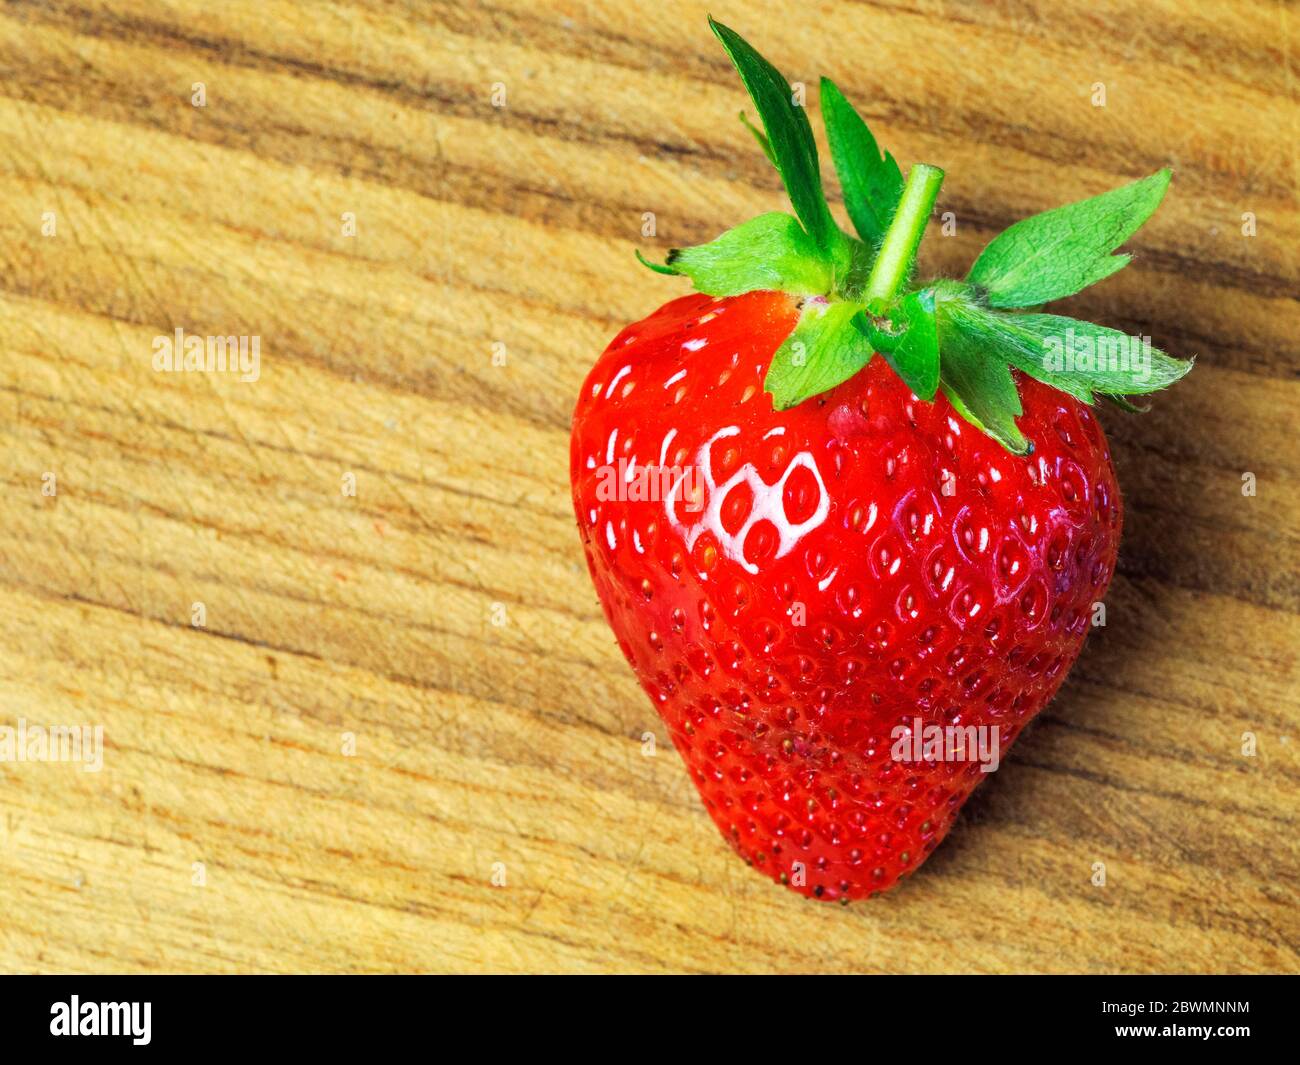 A sngle strawberry on a wooden chopping board with copy space Stock Photo